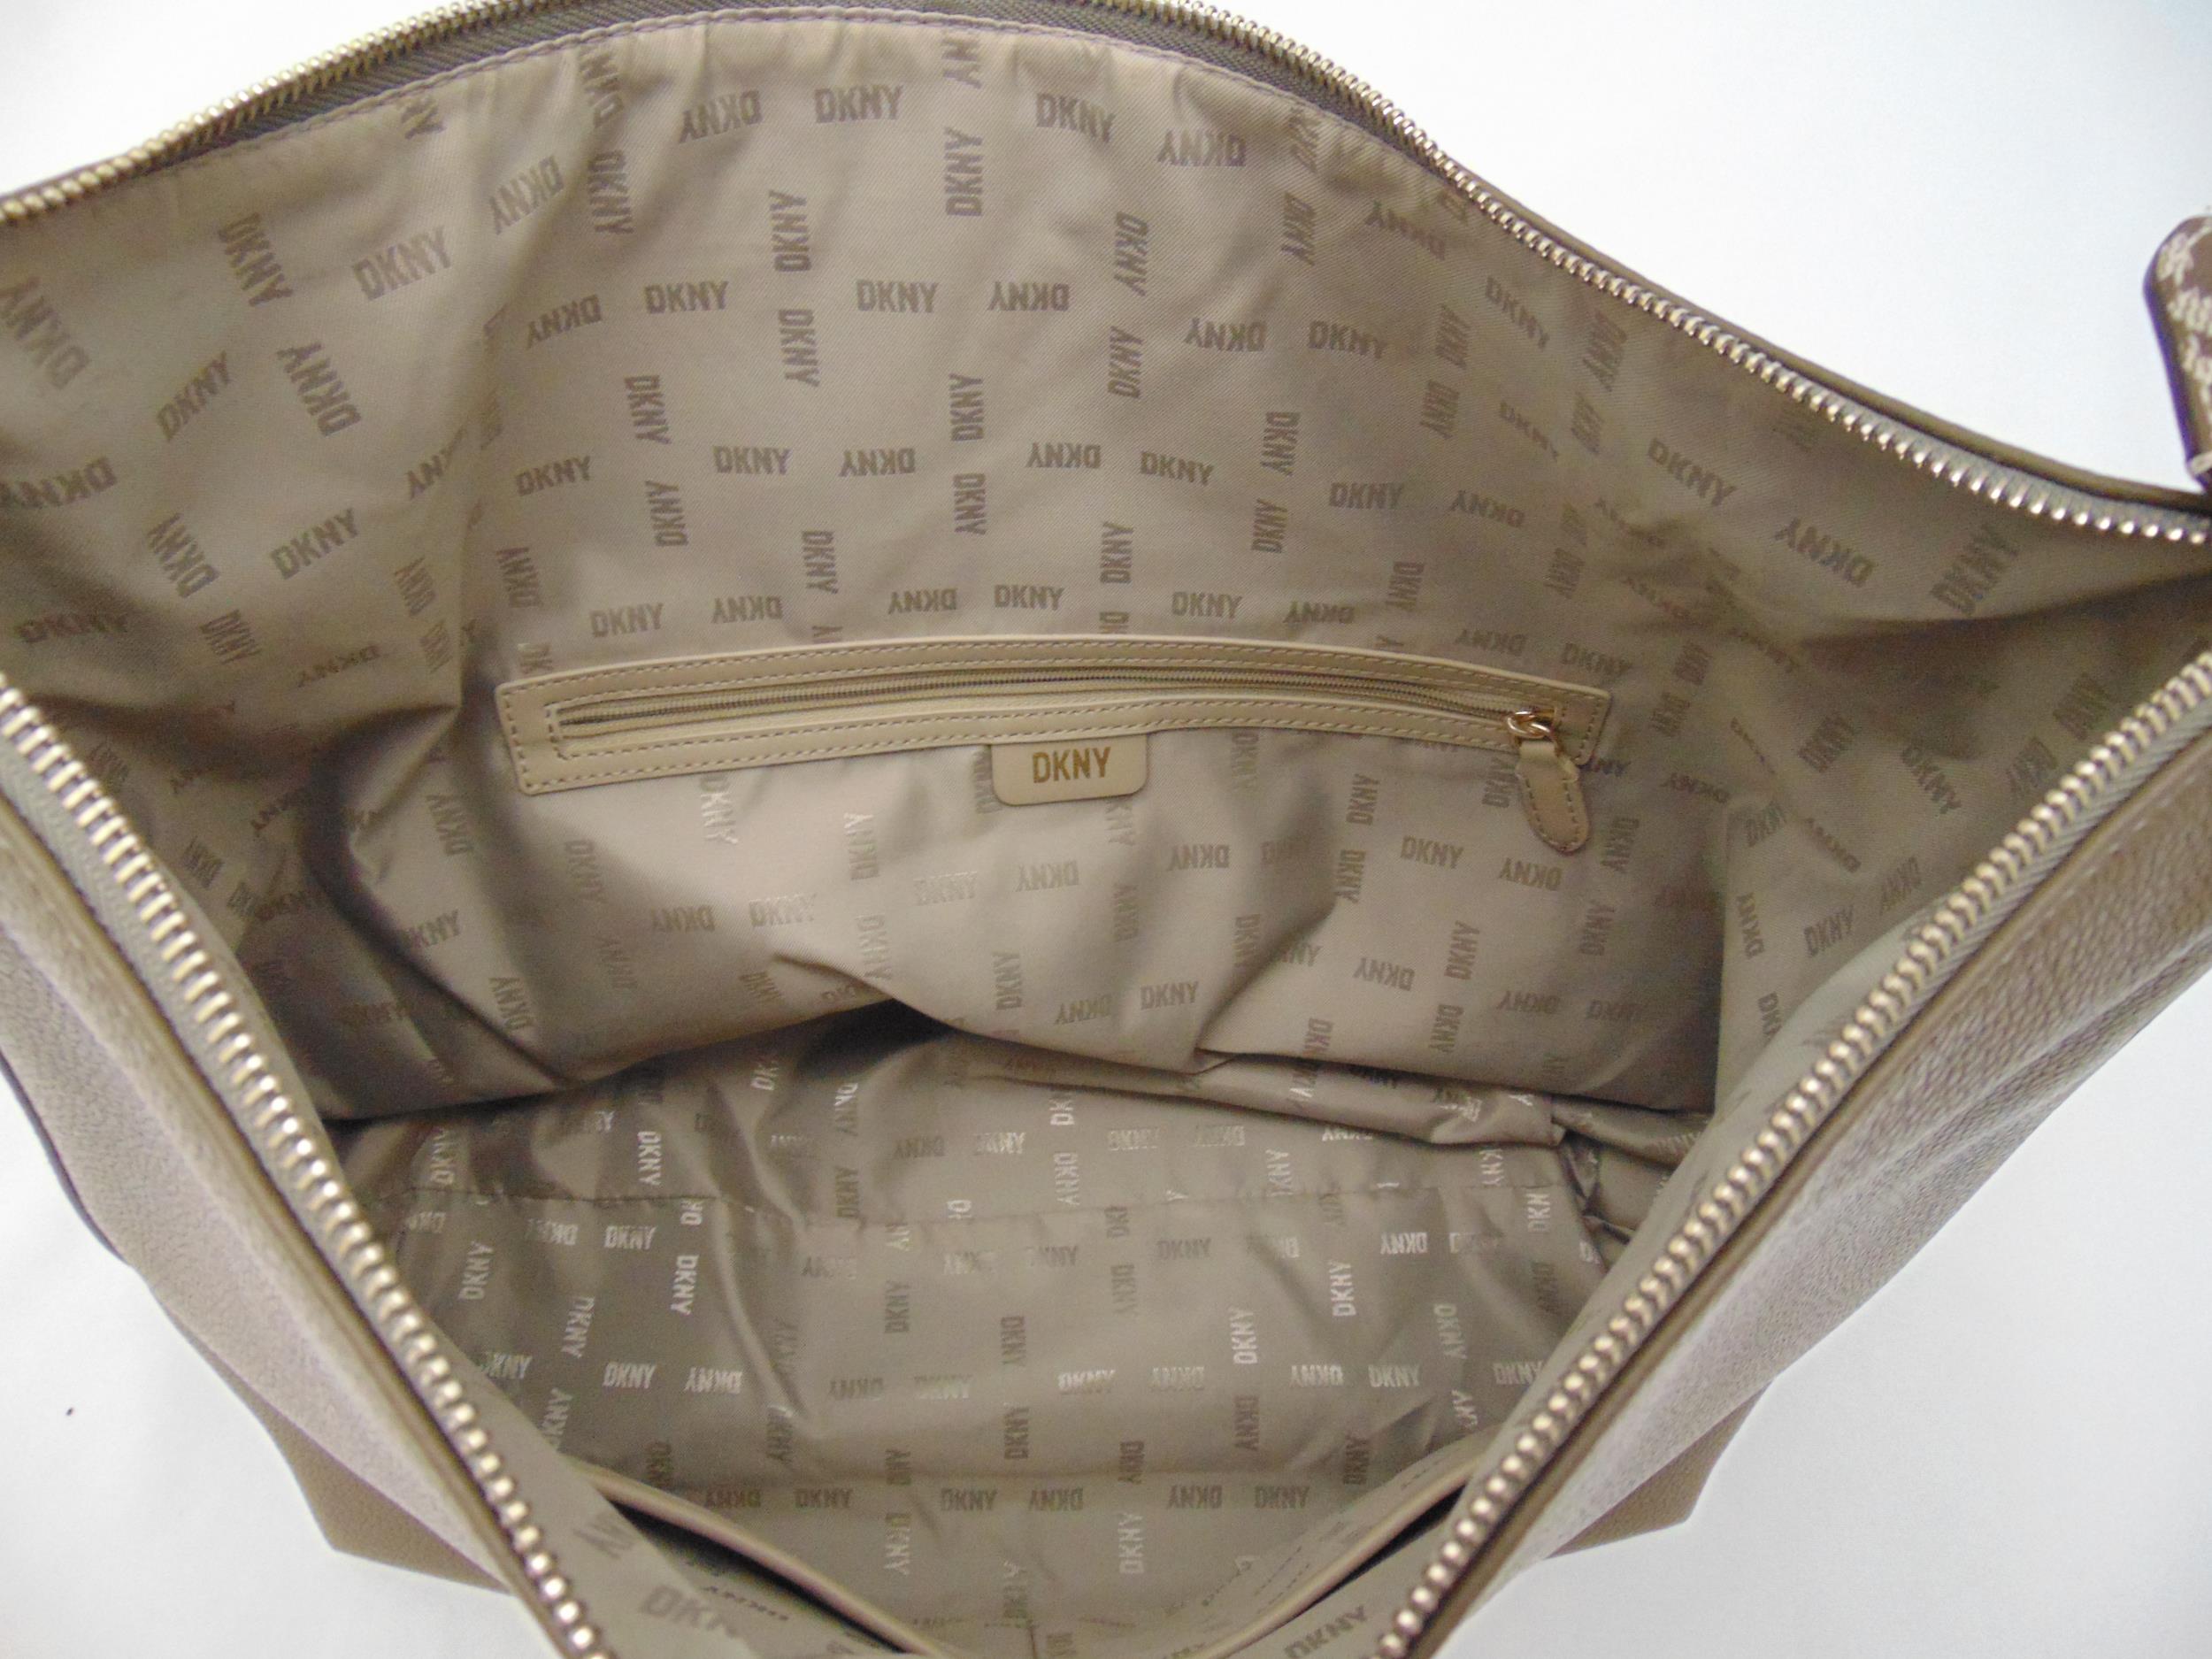 DKNY ladies taupe leather tote bag - Image 3 of 3